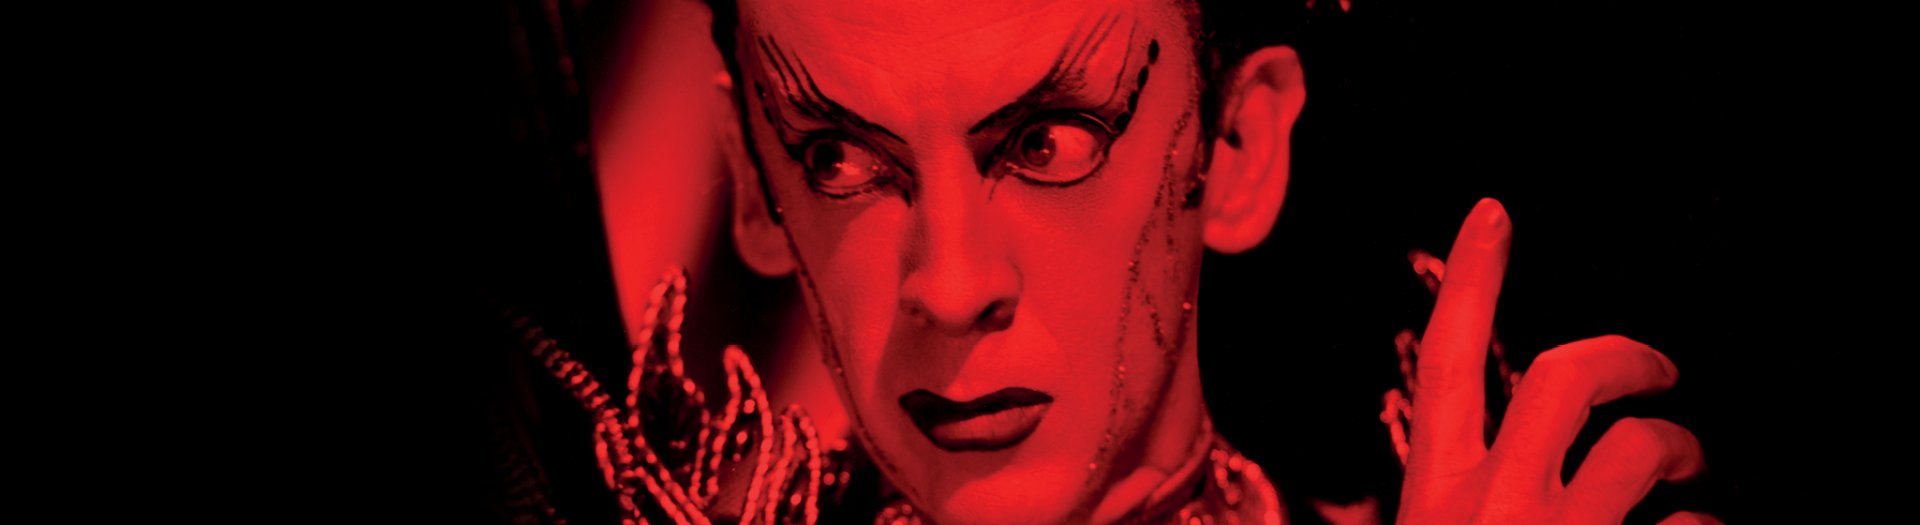 Robert Helpmann performs on stage with dramatic makeup. Their face is bathed in red light.